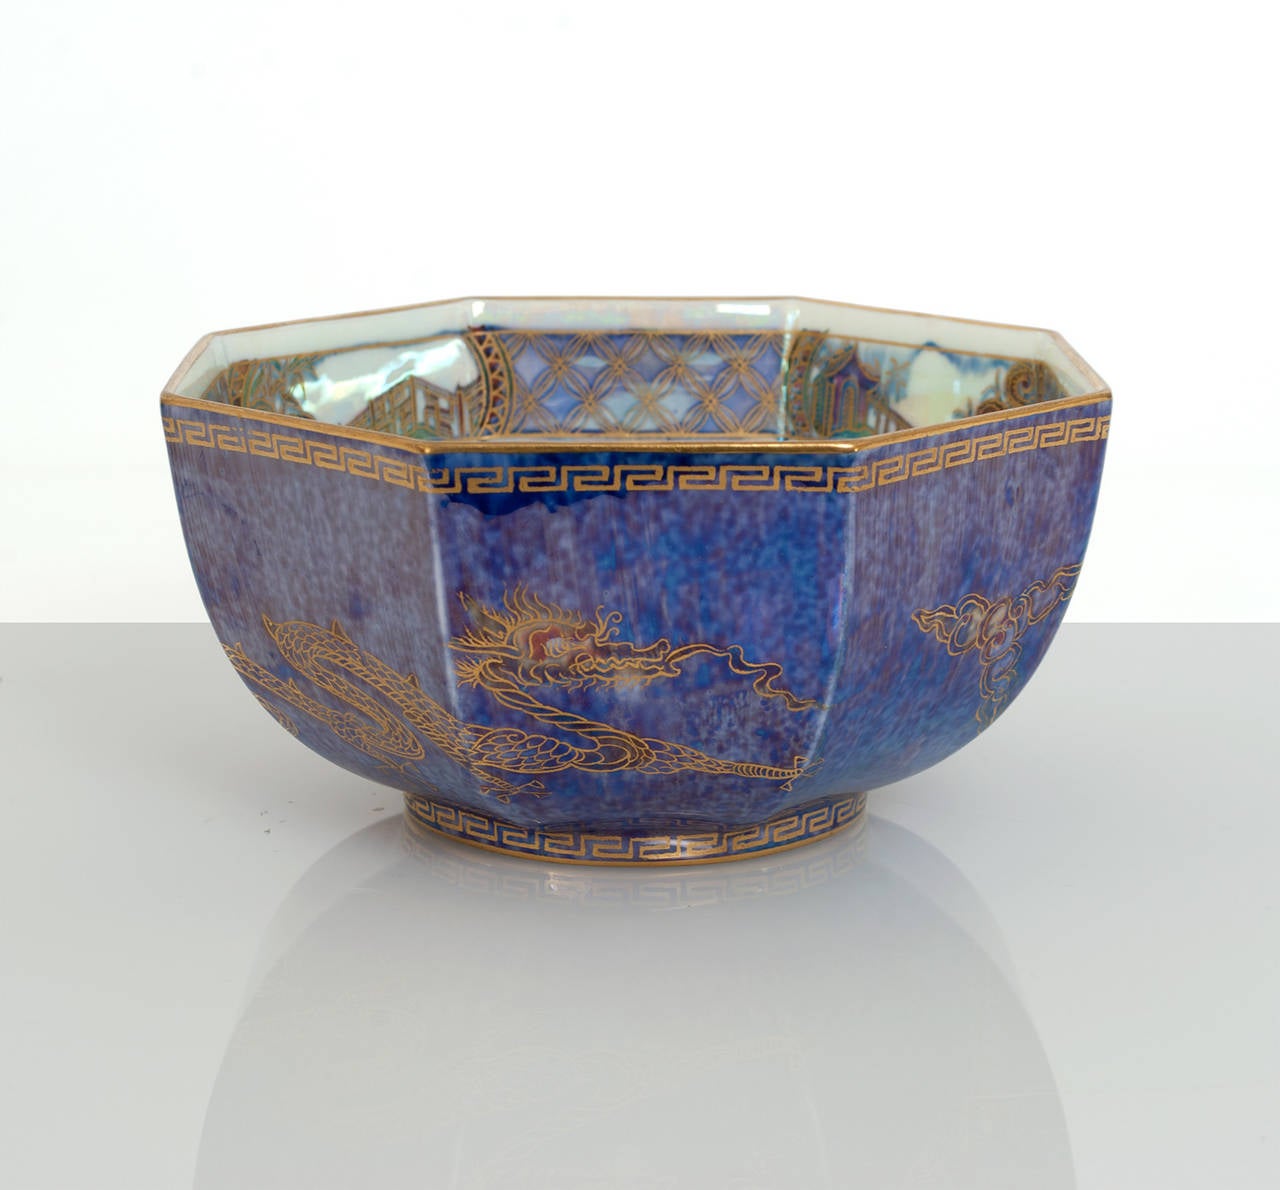 A very finely decorated octagonal Wedgwood Fairyland Lustre bowl designed by Daisy Makeig-Jones. The bowl's mottled blue exterior is decorated with two gilded celestial dragons and a gold dragon at the inside center. Excellent condition. Measures: